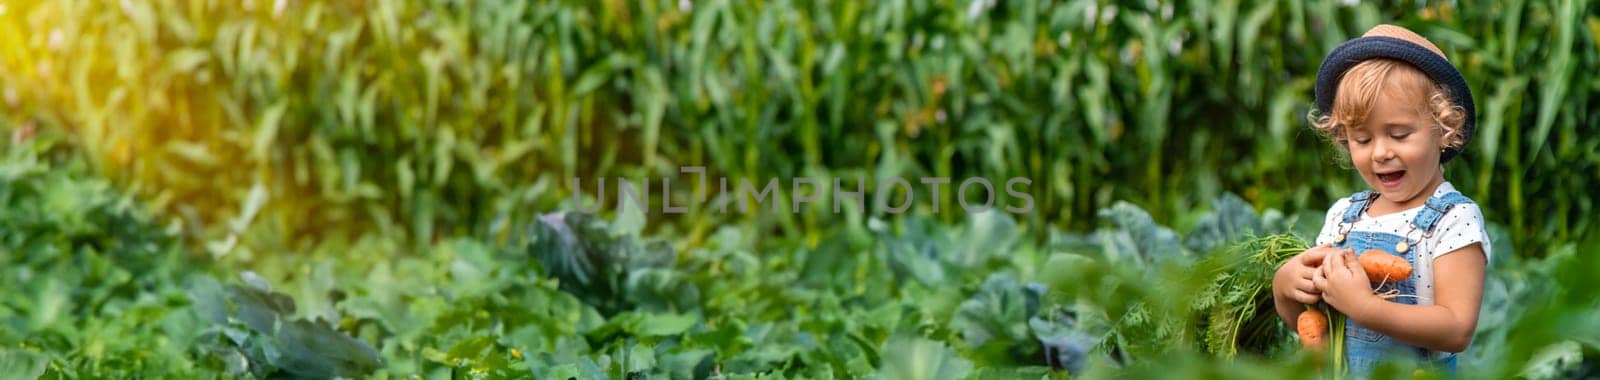 A child harvests carrots and beets in the garden. Selective focus. by yanadjana